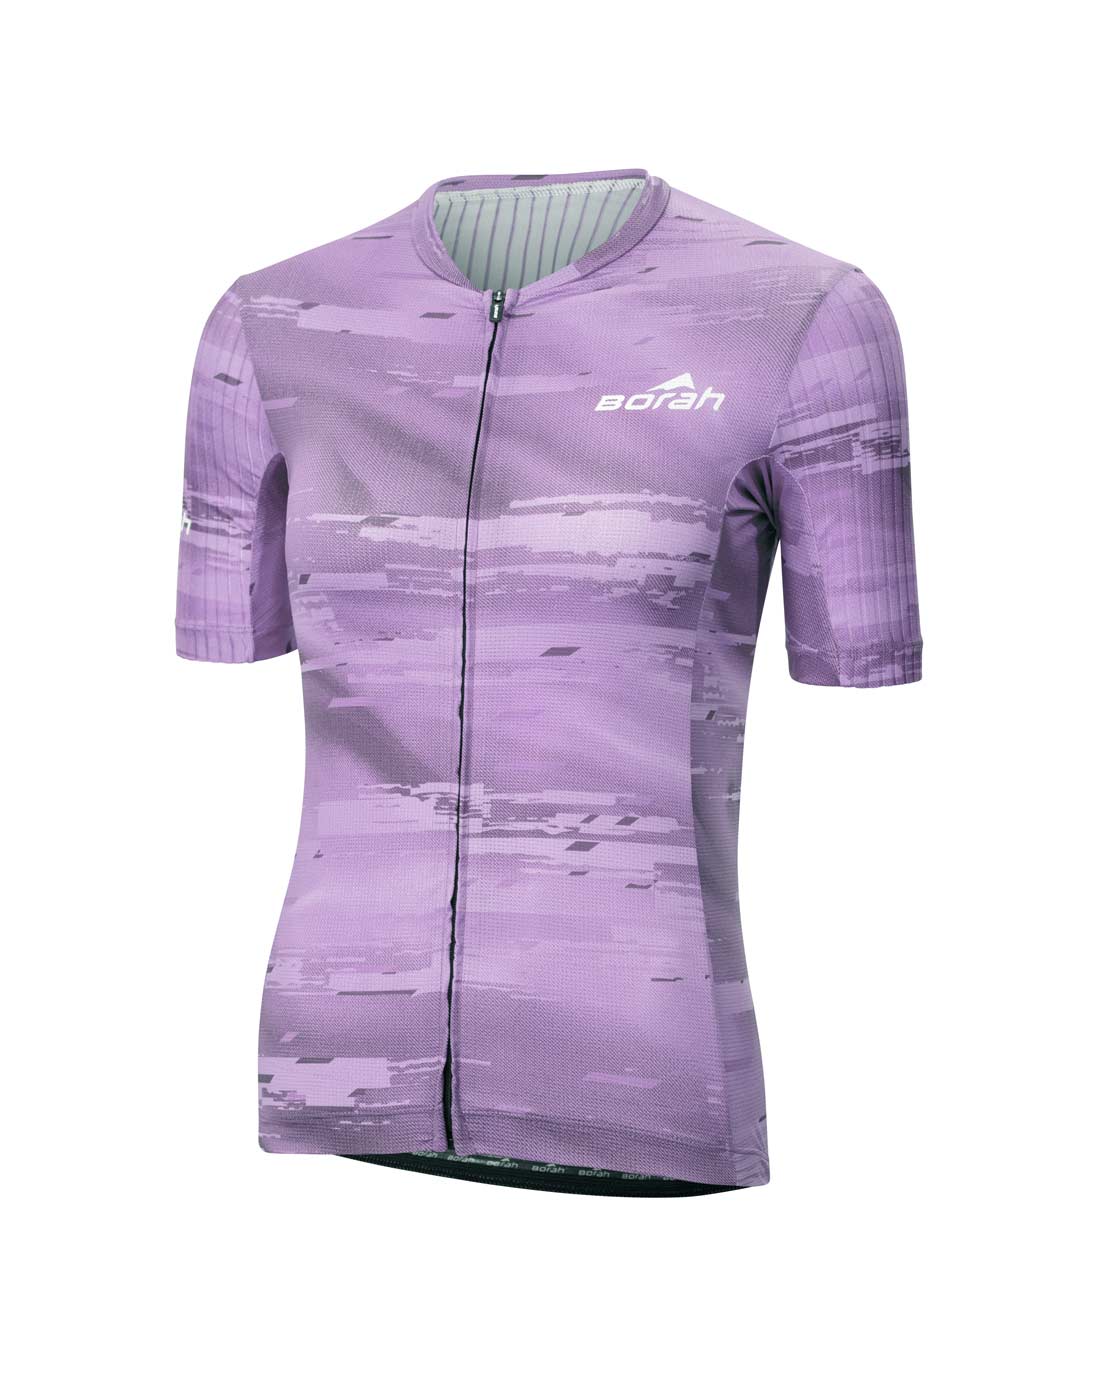 Women's OTW Spark Cycling Jersey Front